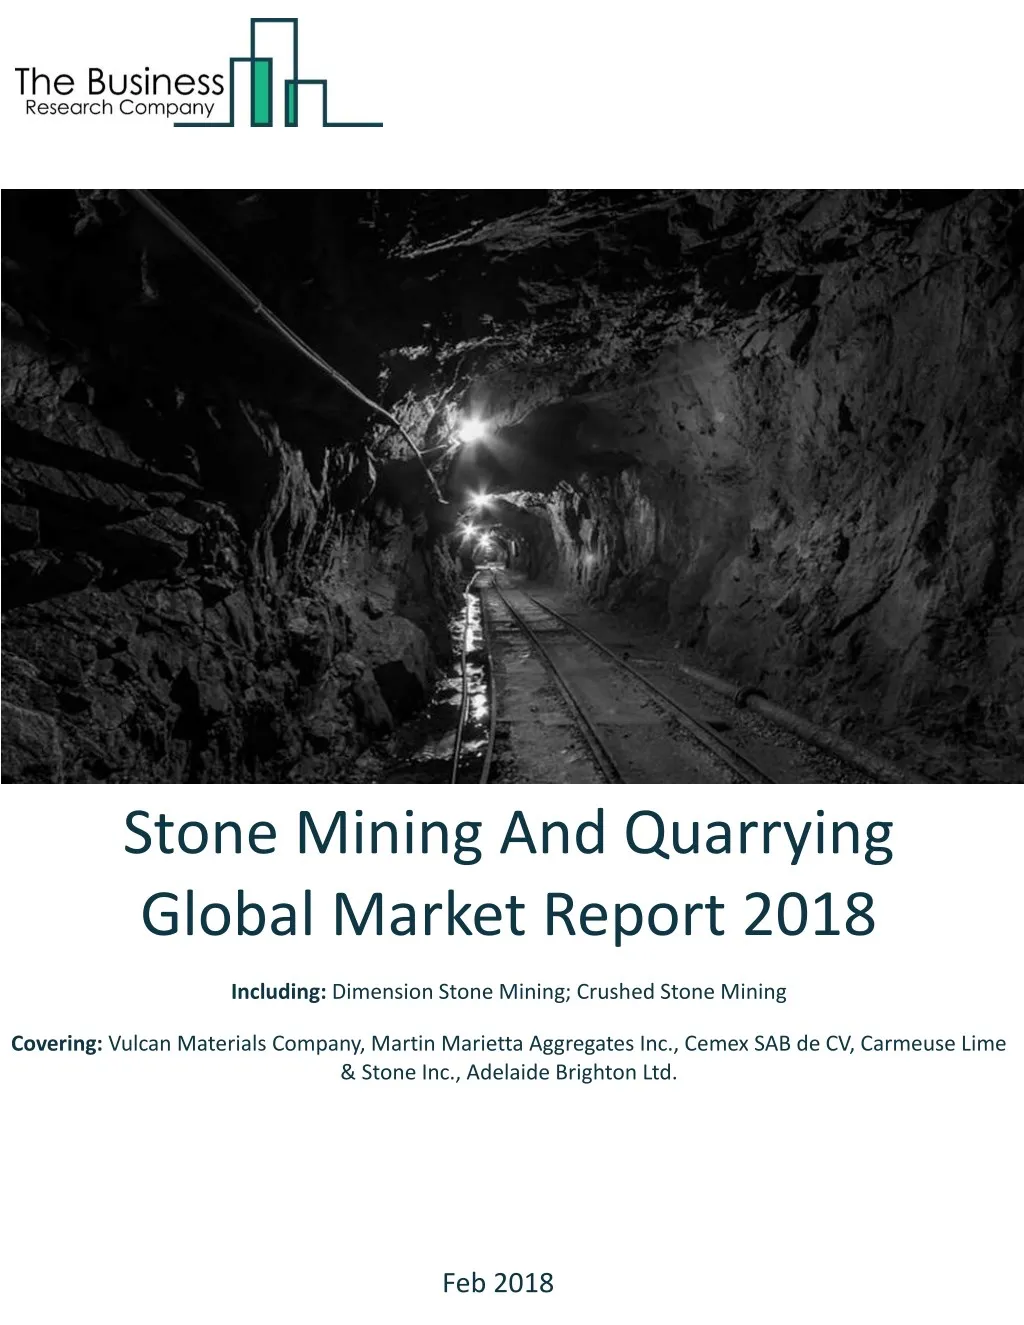 stone mining and quarrying global market report